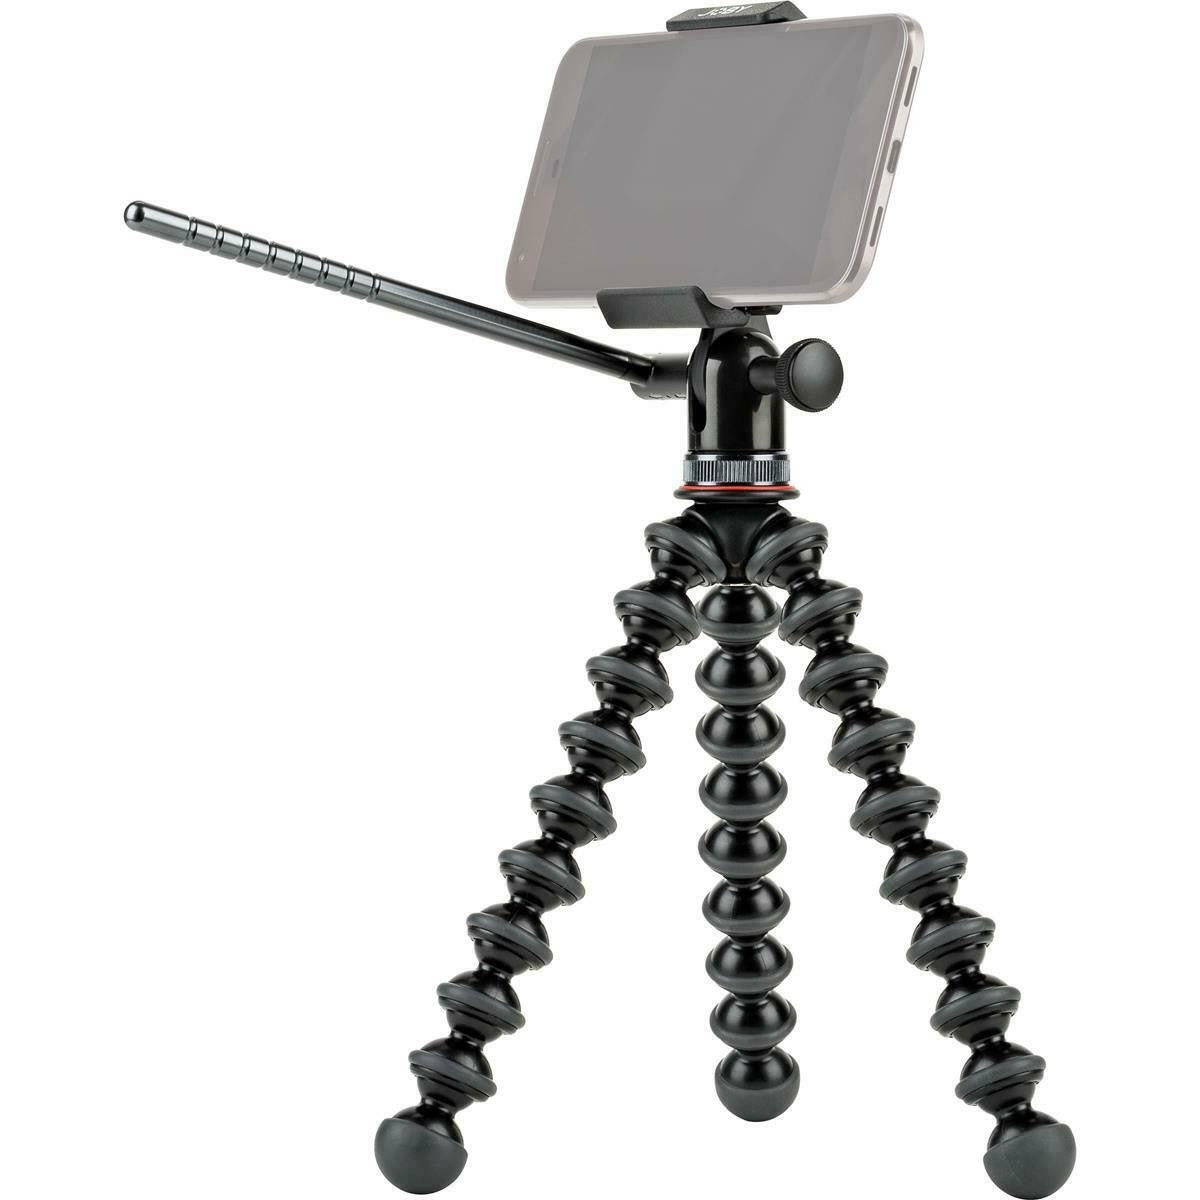 Product Image of JOBY GripTight PRO GP Video Stand, Pan and Tilt Video Head and Gorilla Pod Flexible Tripod - for Smartphones